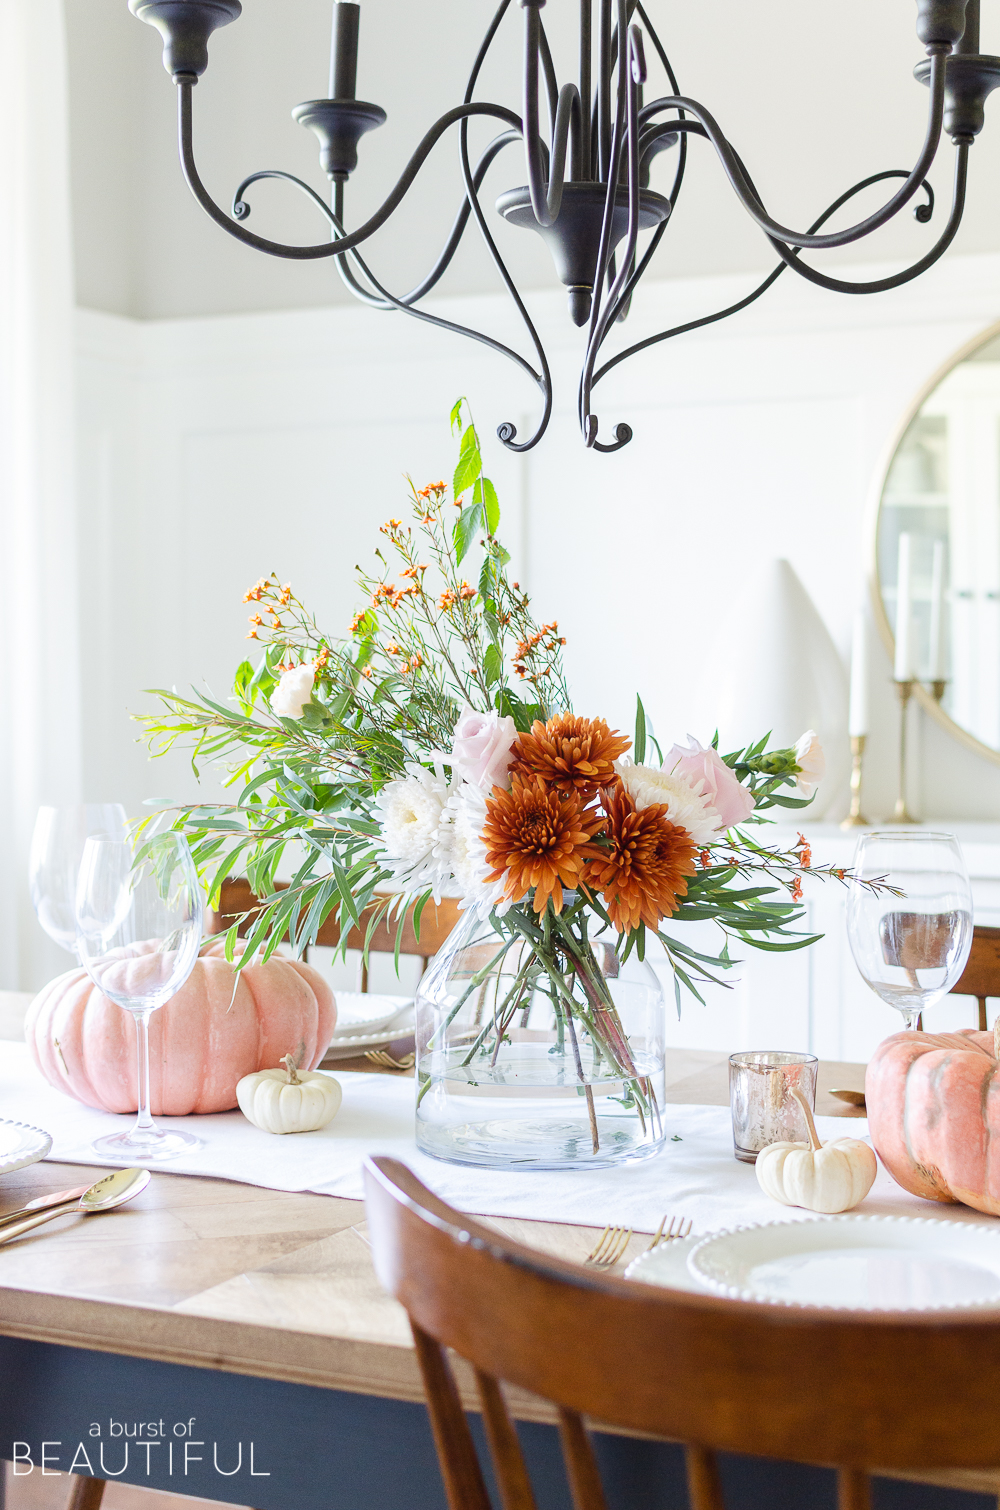 19 Best Fall Tablescapes - Sparkling Boy Ideas